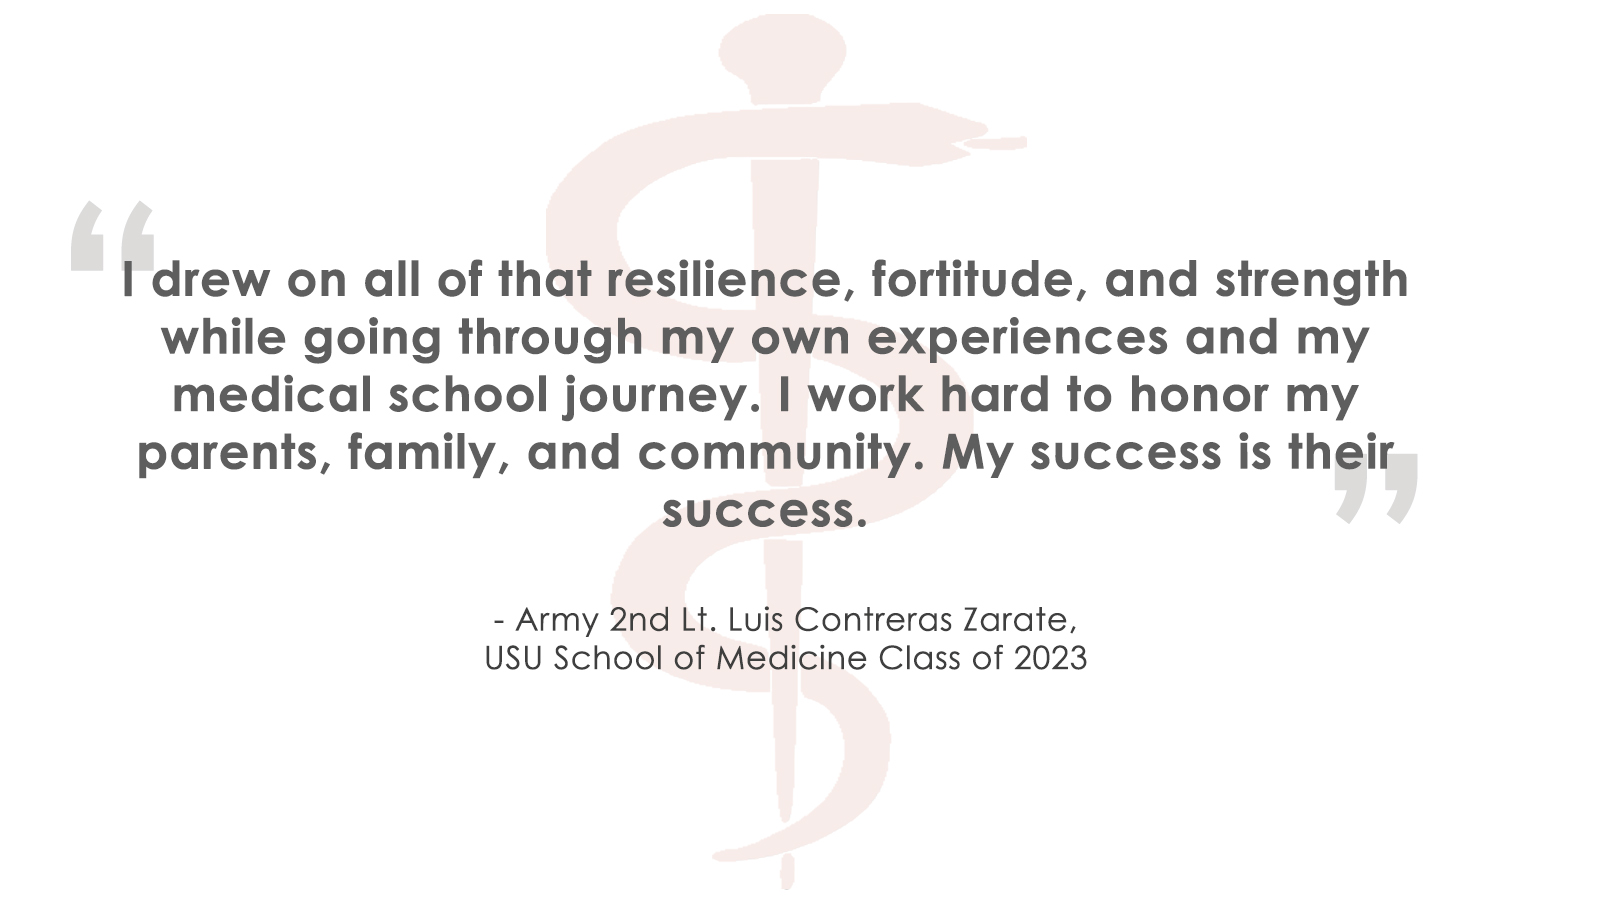 “I drew on all of that resilience, fortitude, and strength while going through my own experiences and my medical school journey. I work hard to honor my parents, family, and community. My success is their success.”